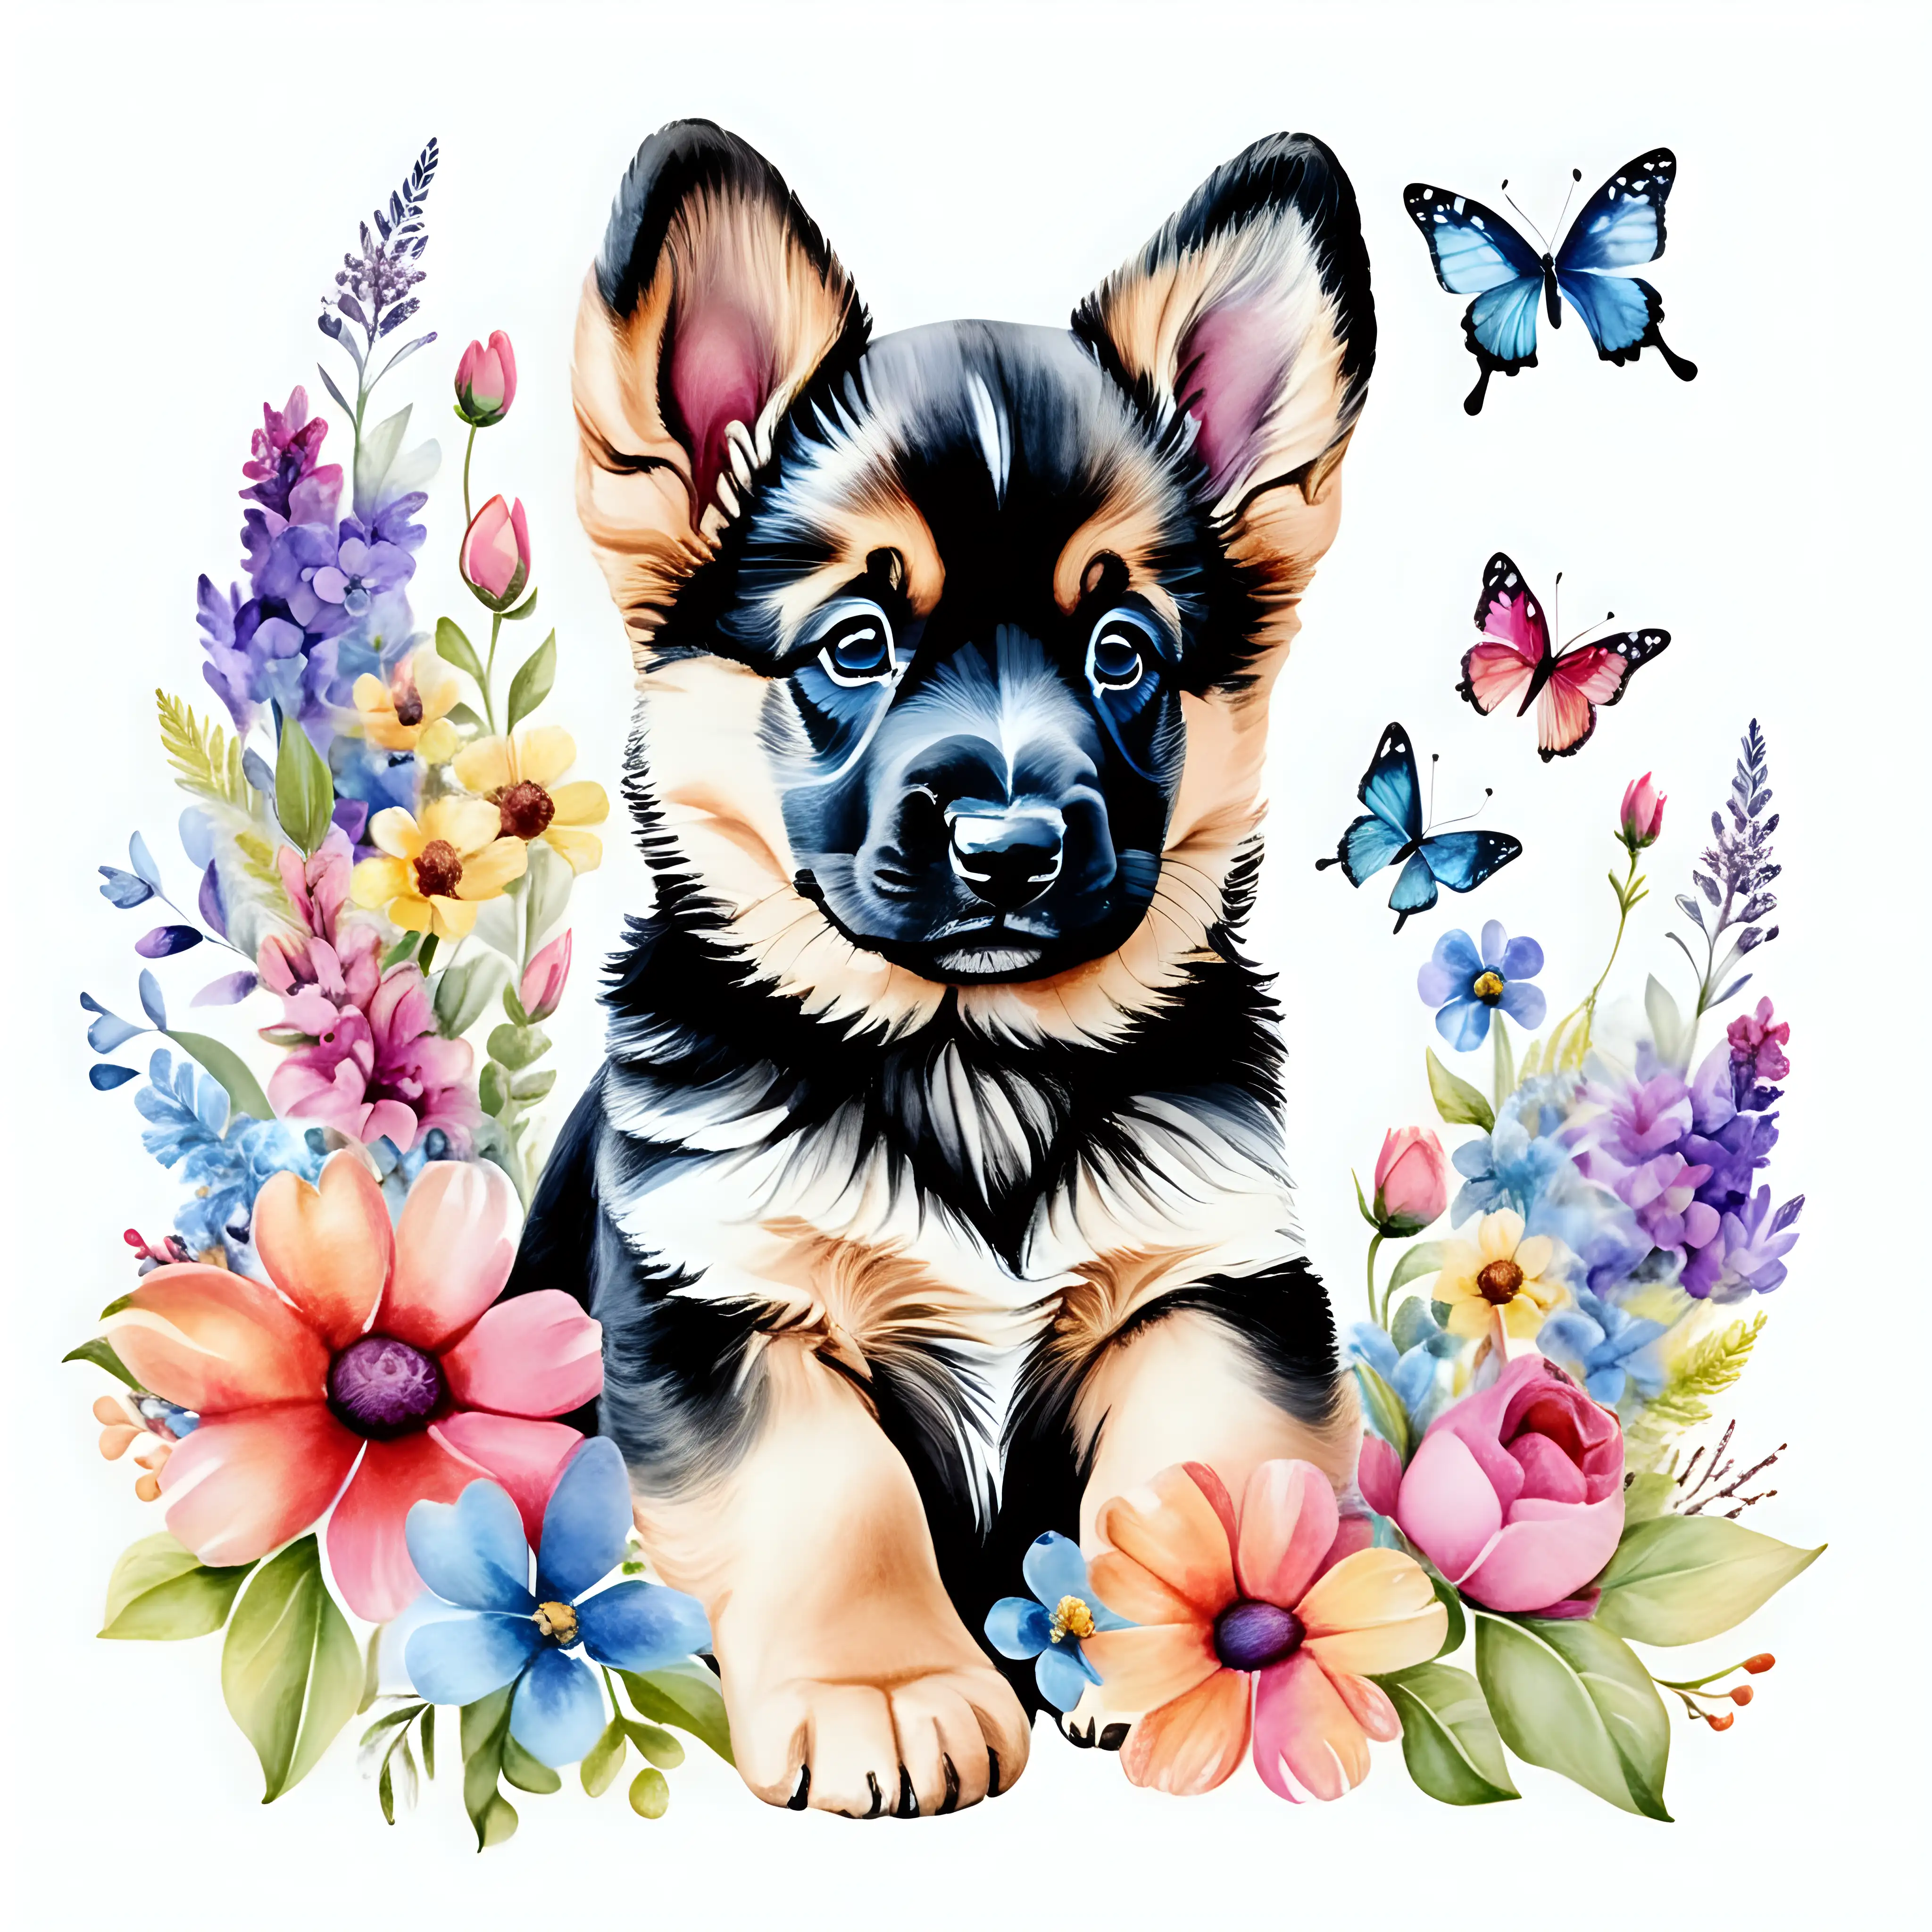 Charming Watercolor German Shepherd Puppy Surrounded by Vibrant Flowers and Butterflies